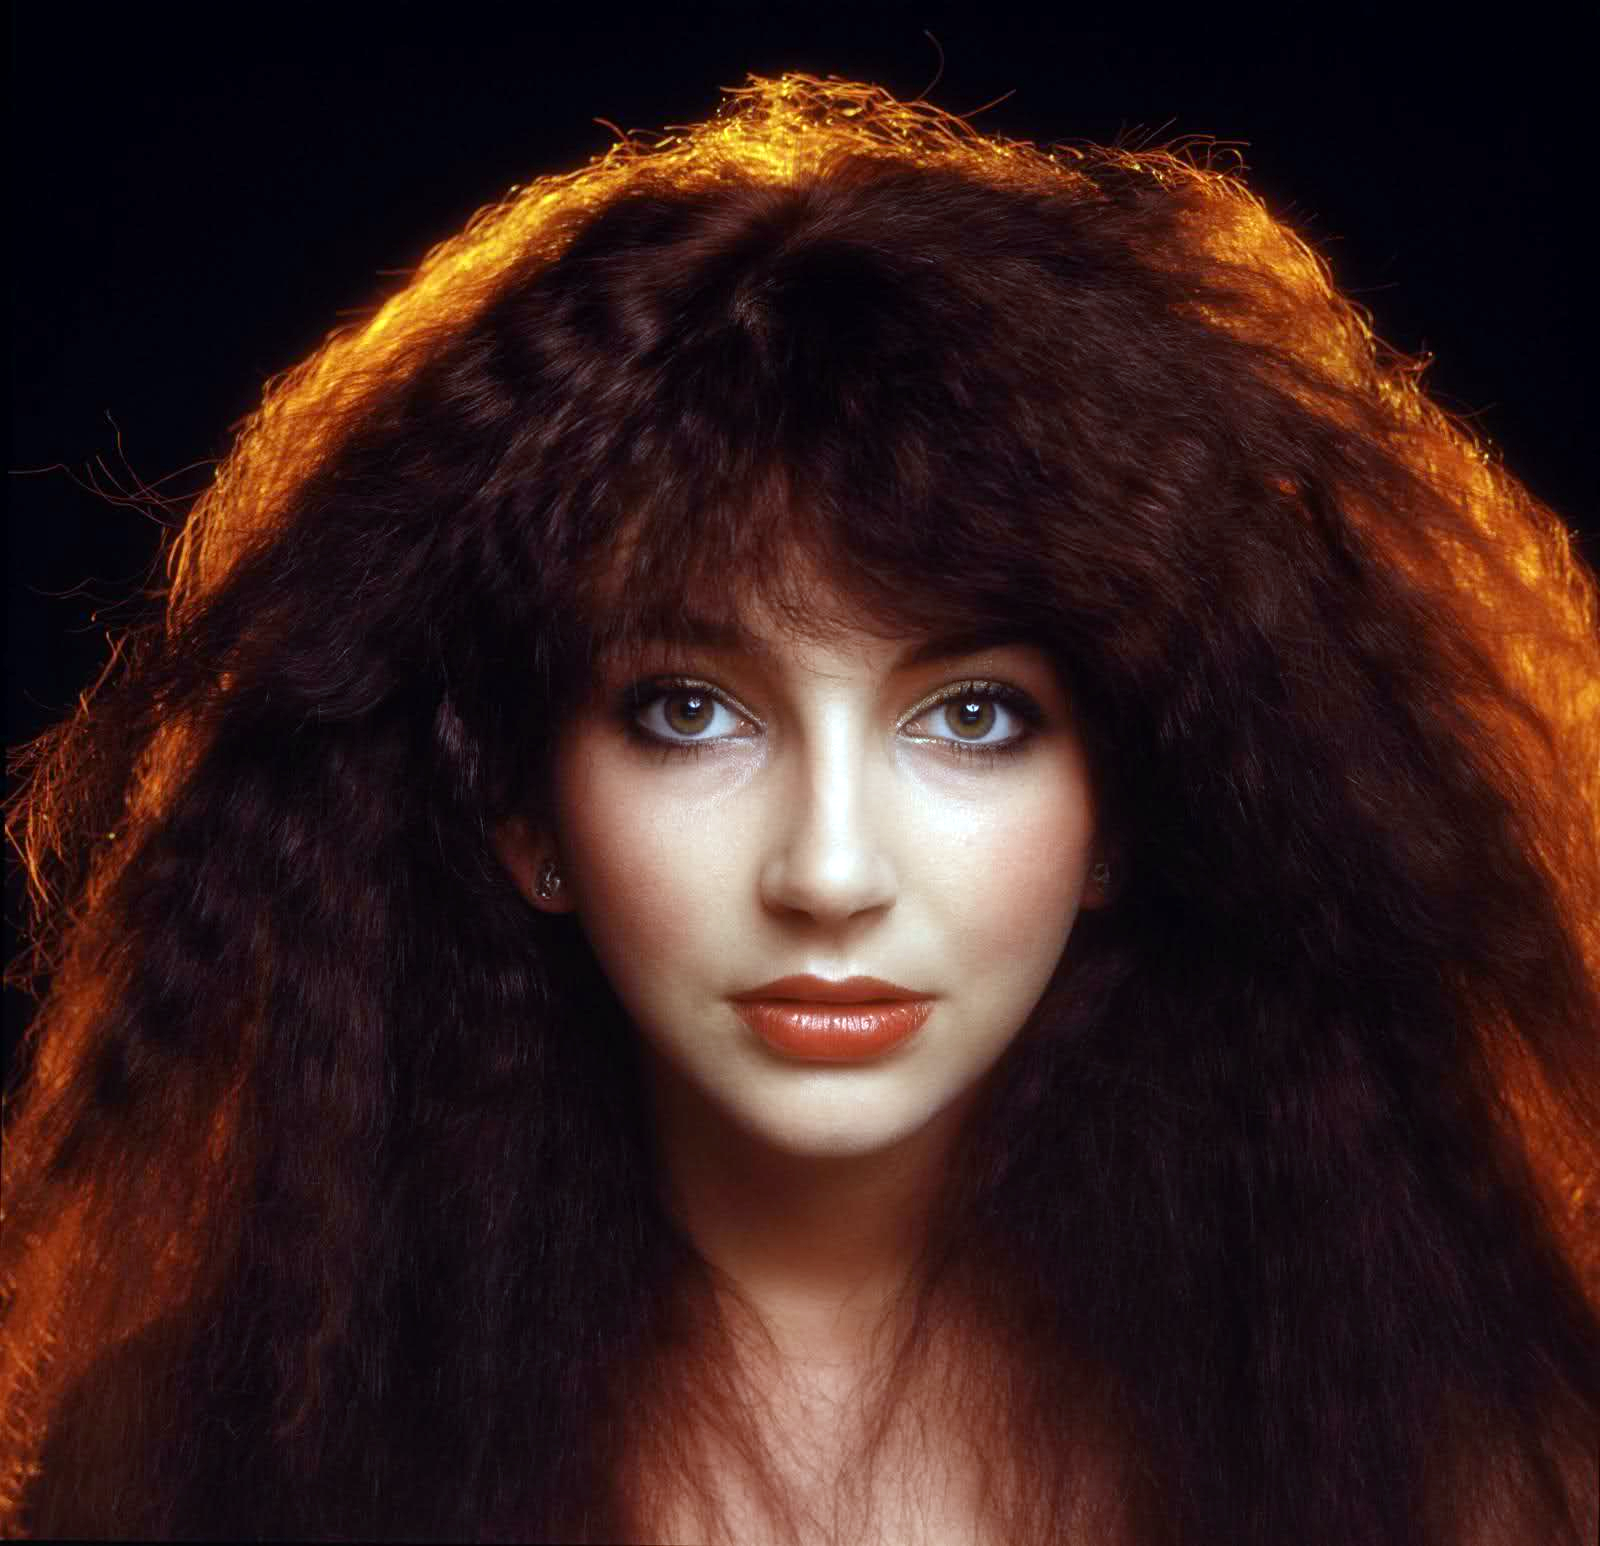 Kate Bush addresses possible new album touring plans in rare interview